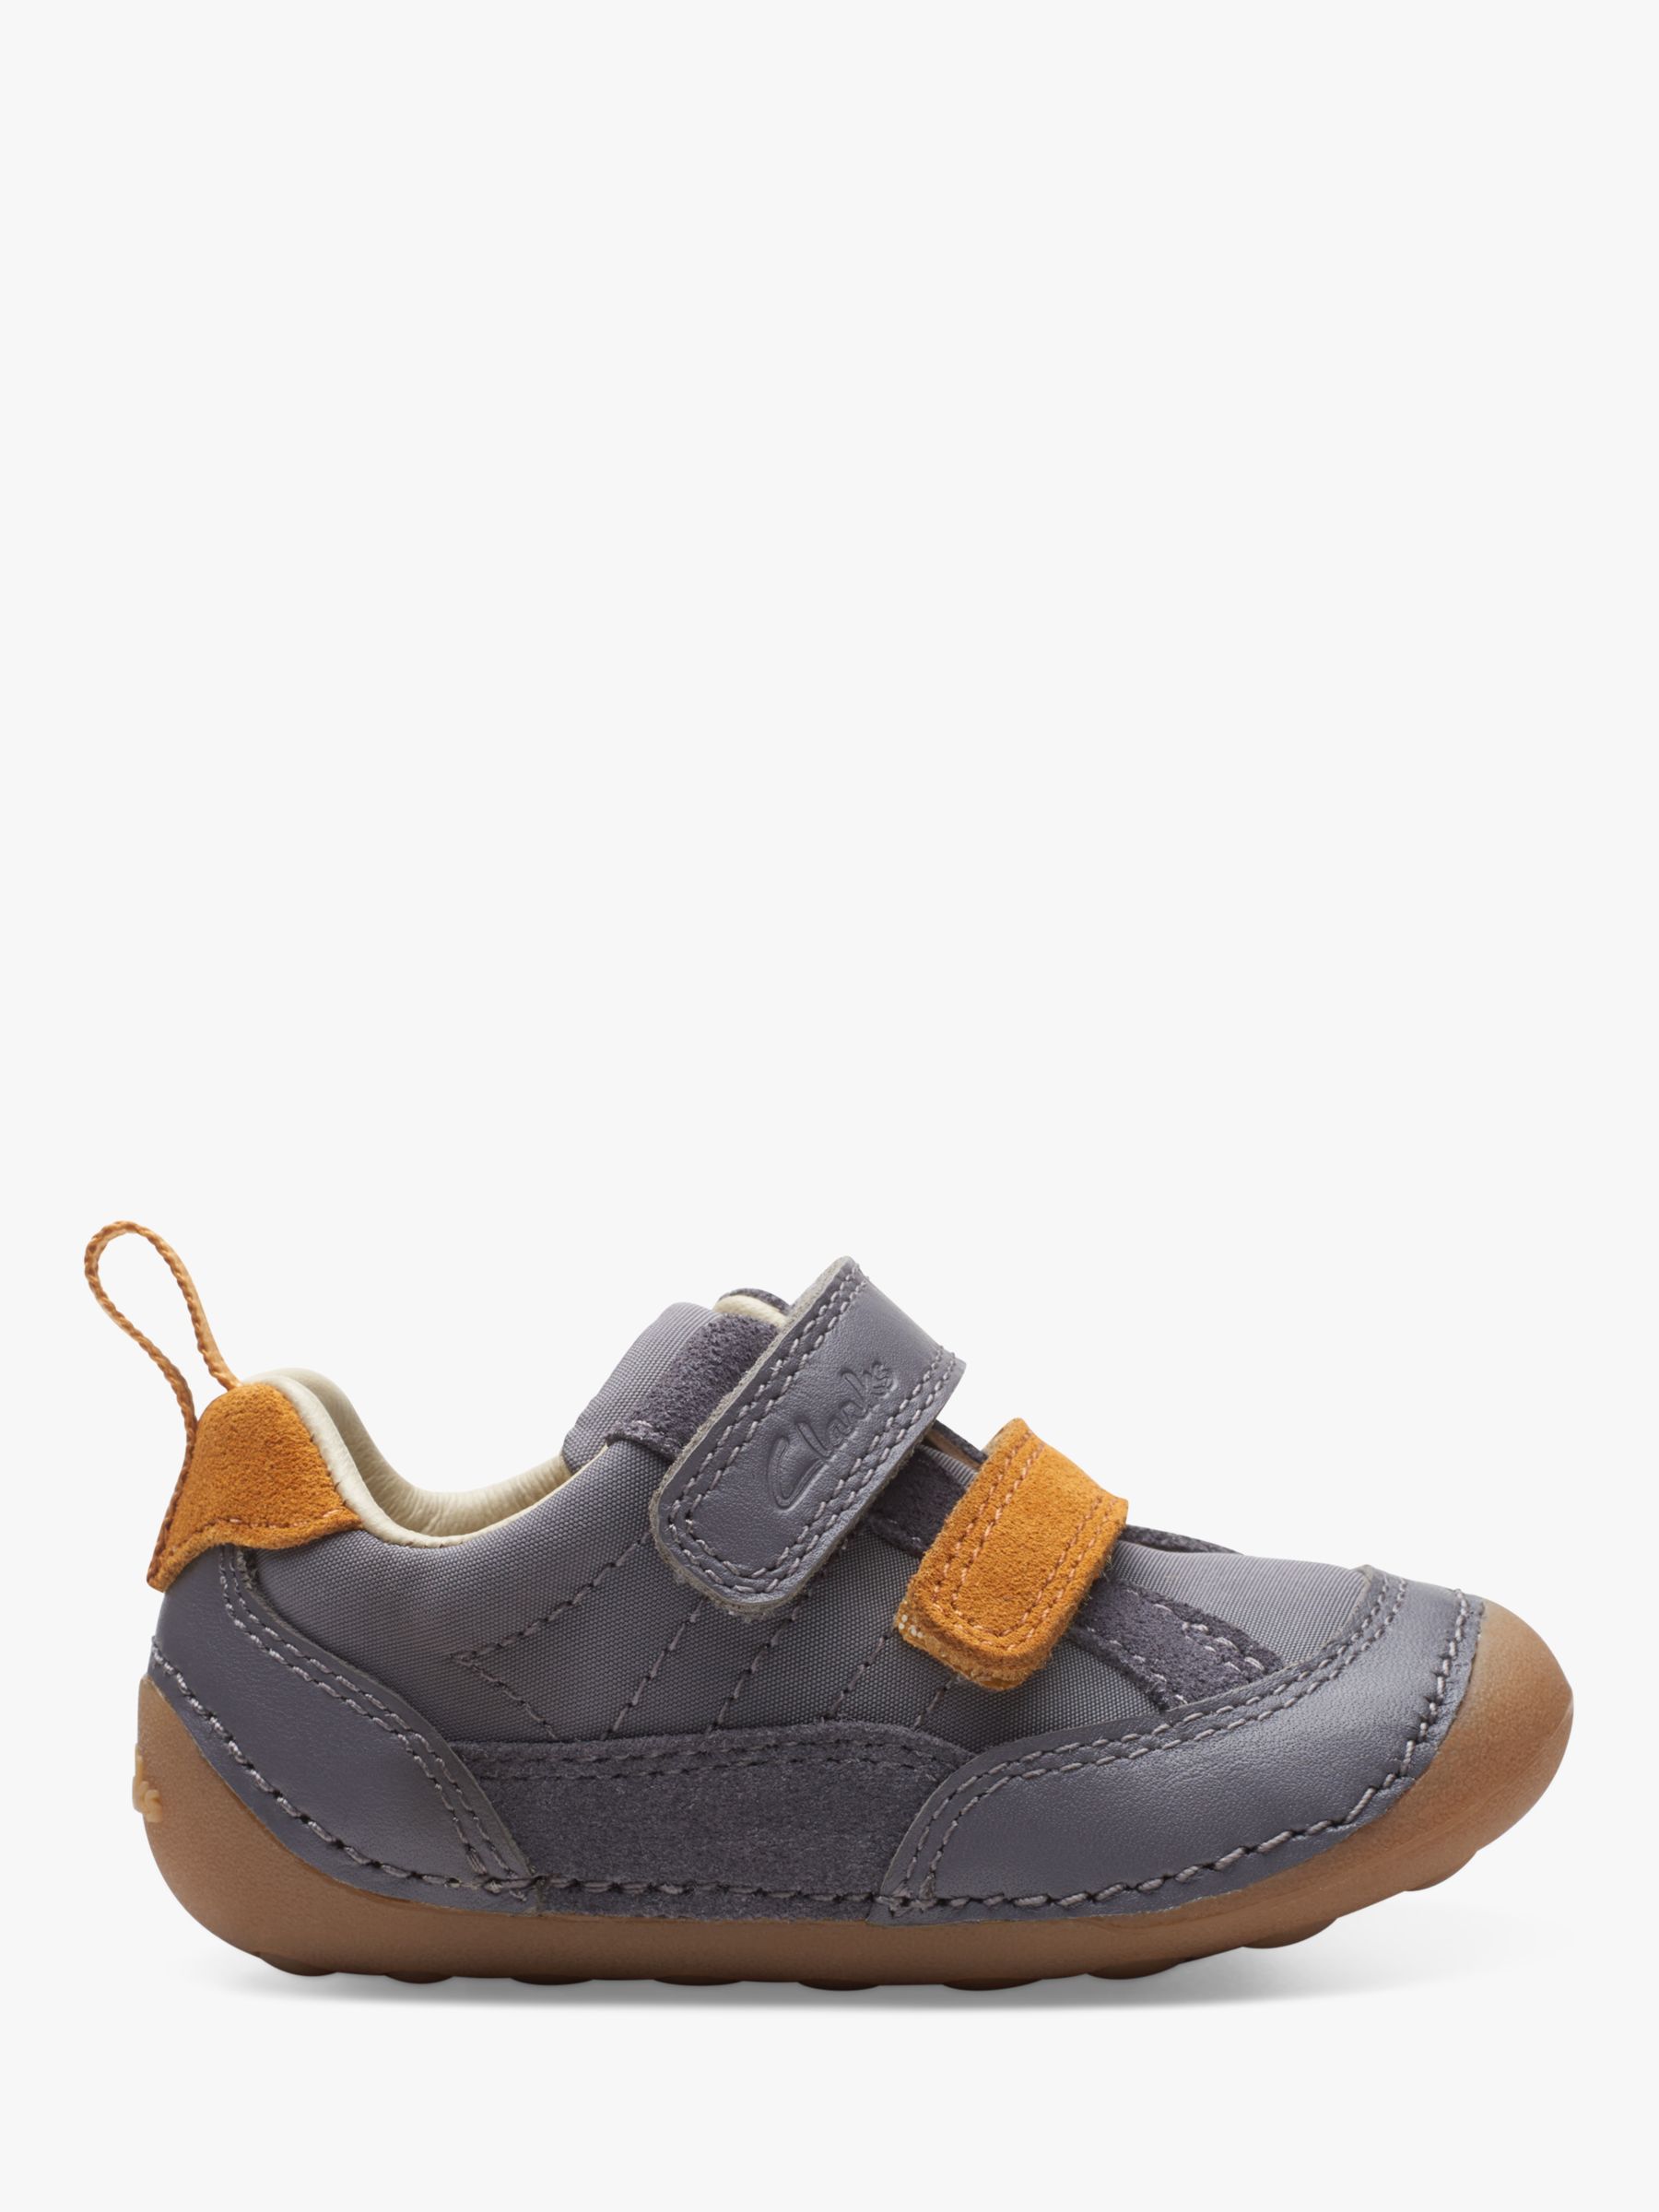 Ved daggry semester dette Clarks Baby Tiny Fawn Pre-Walker Shoes at John Lewis & Partners